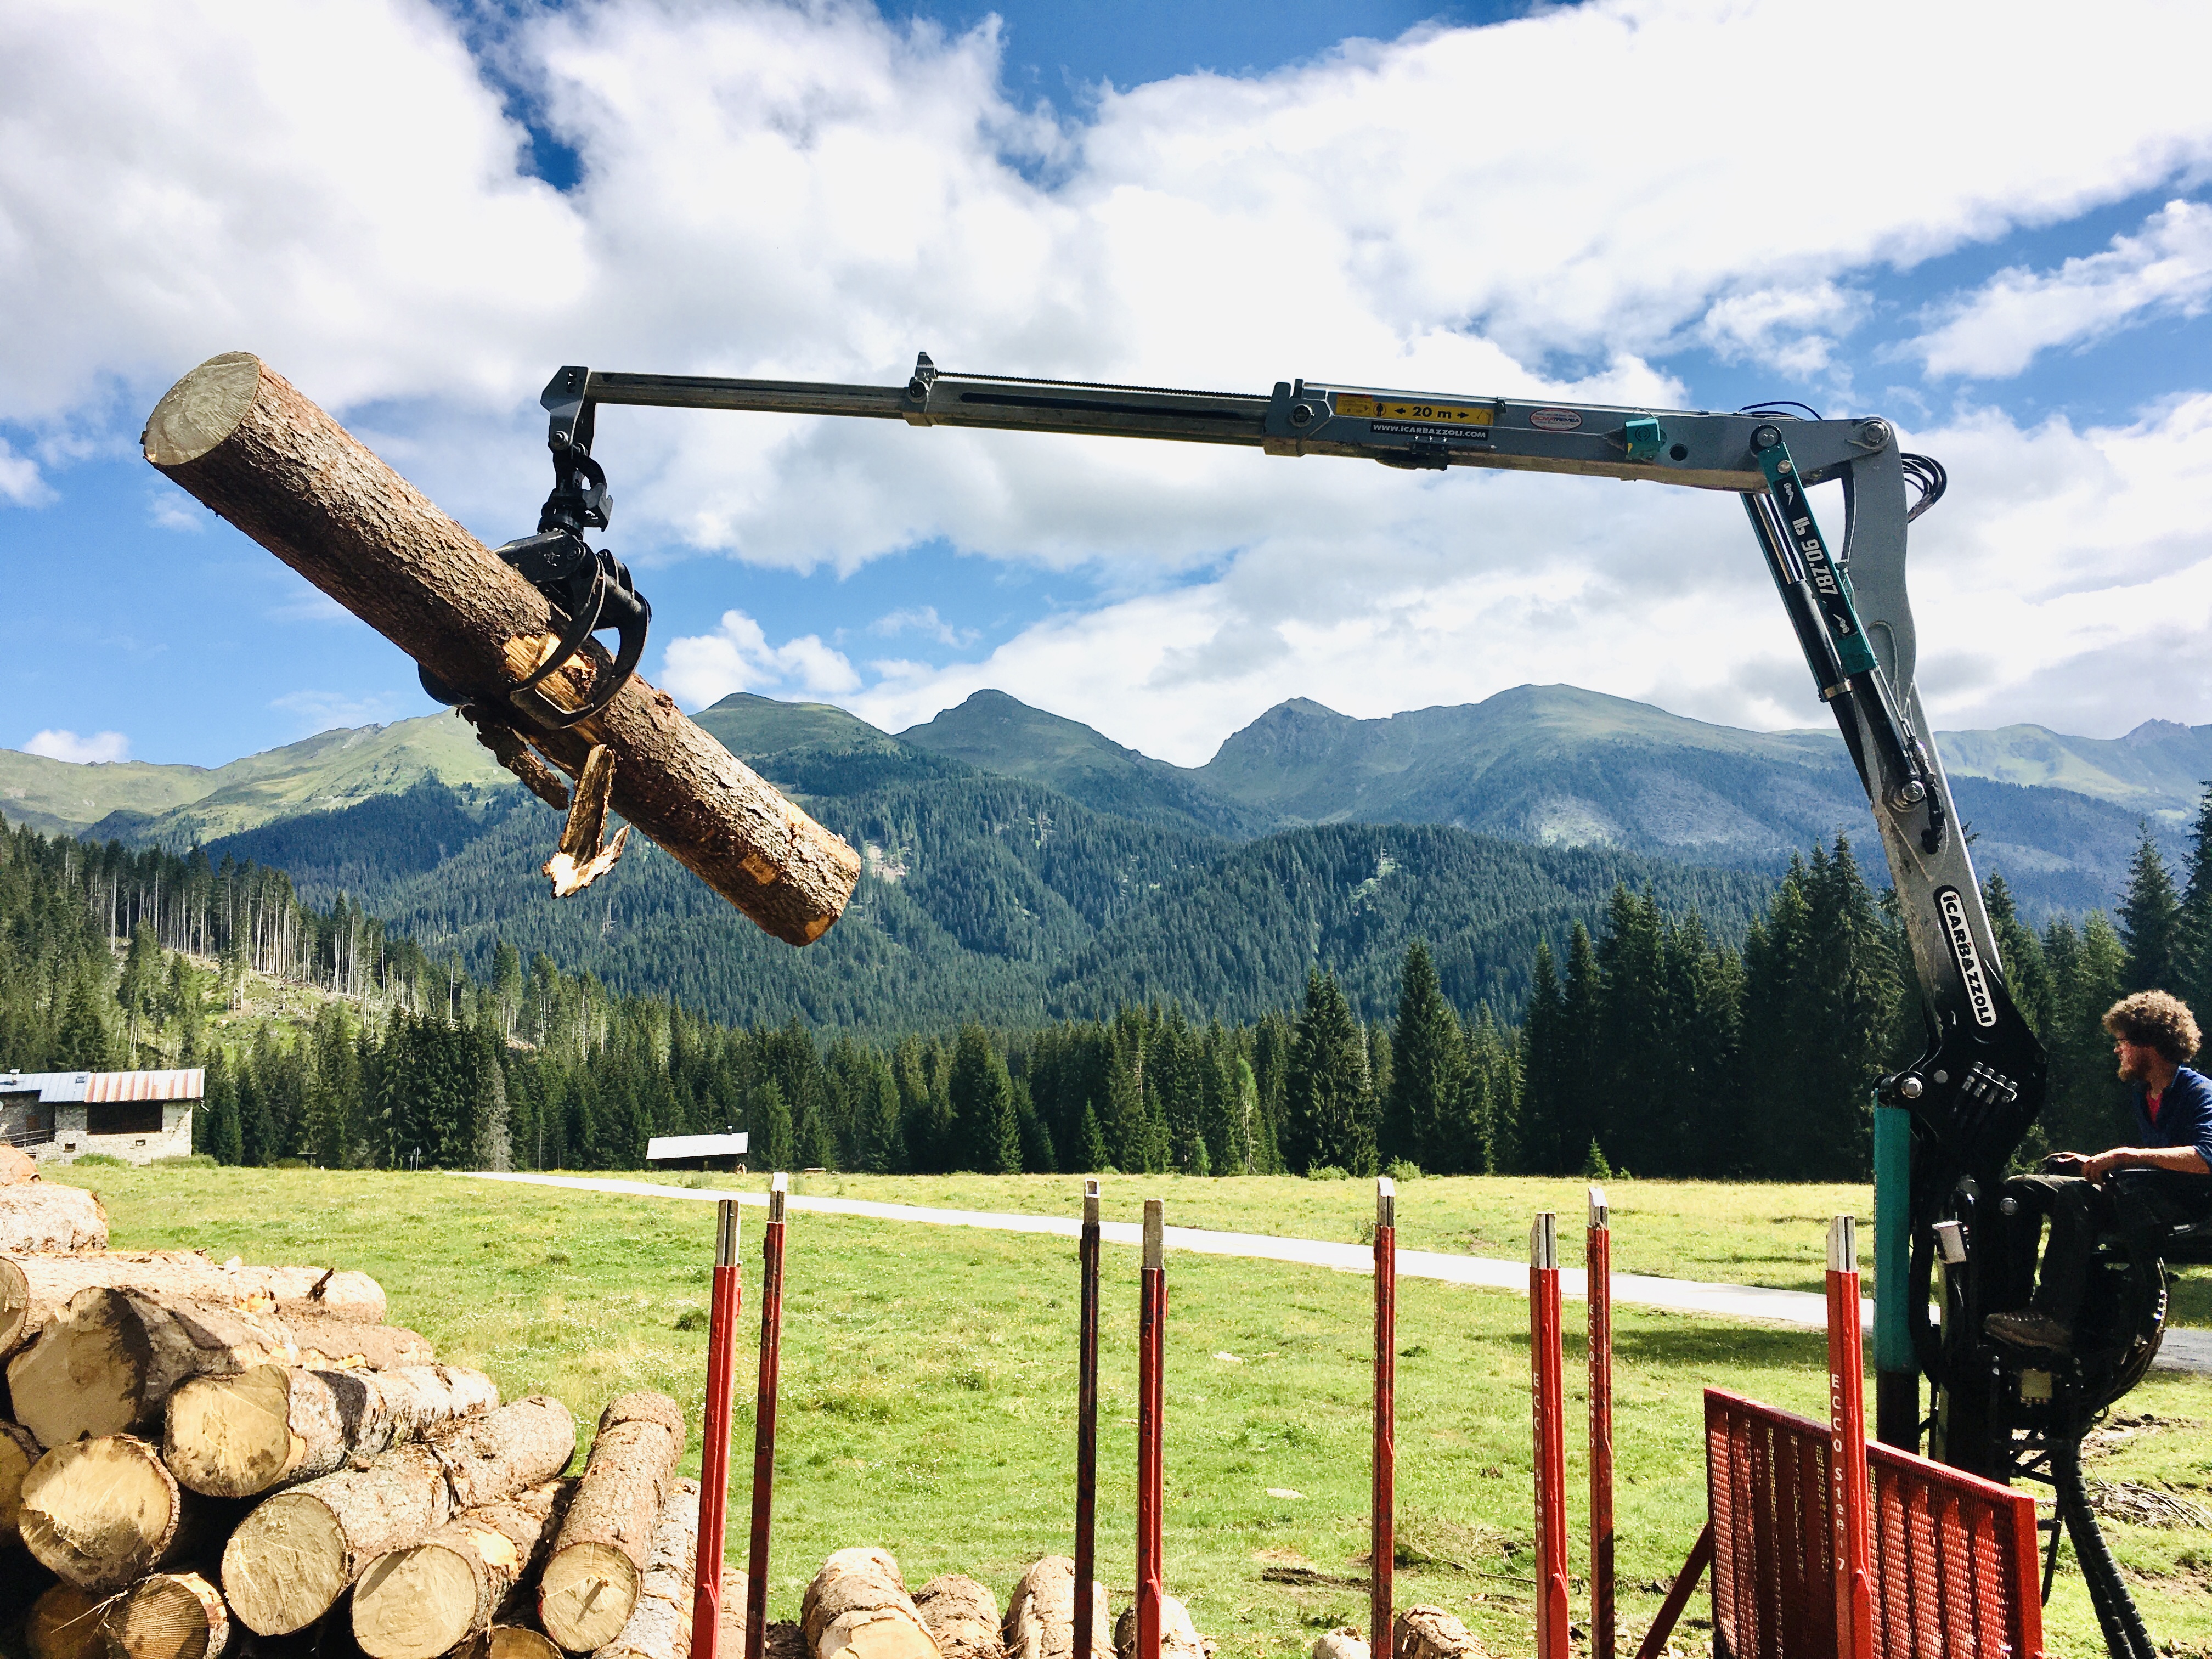 ICARBAZZOLI: Forestry and Recycling cranes